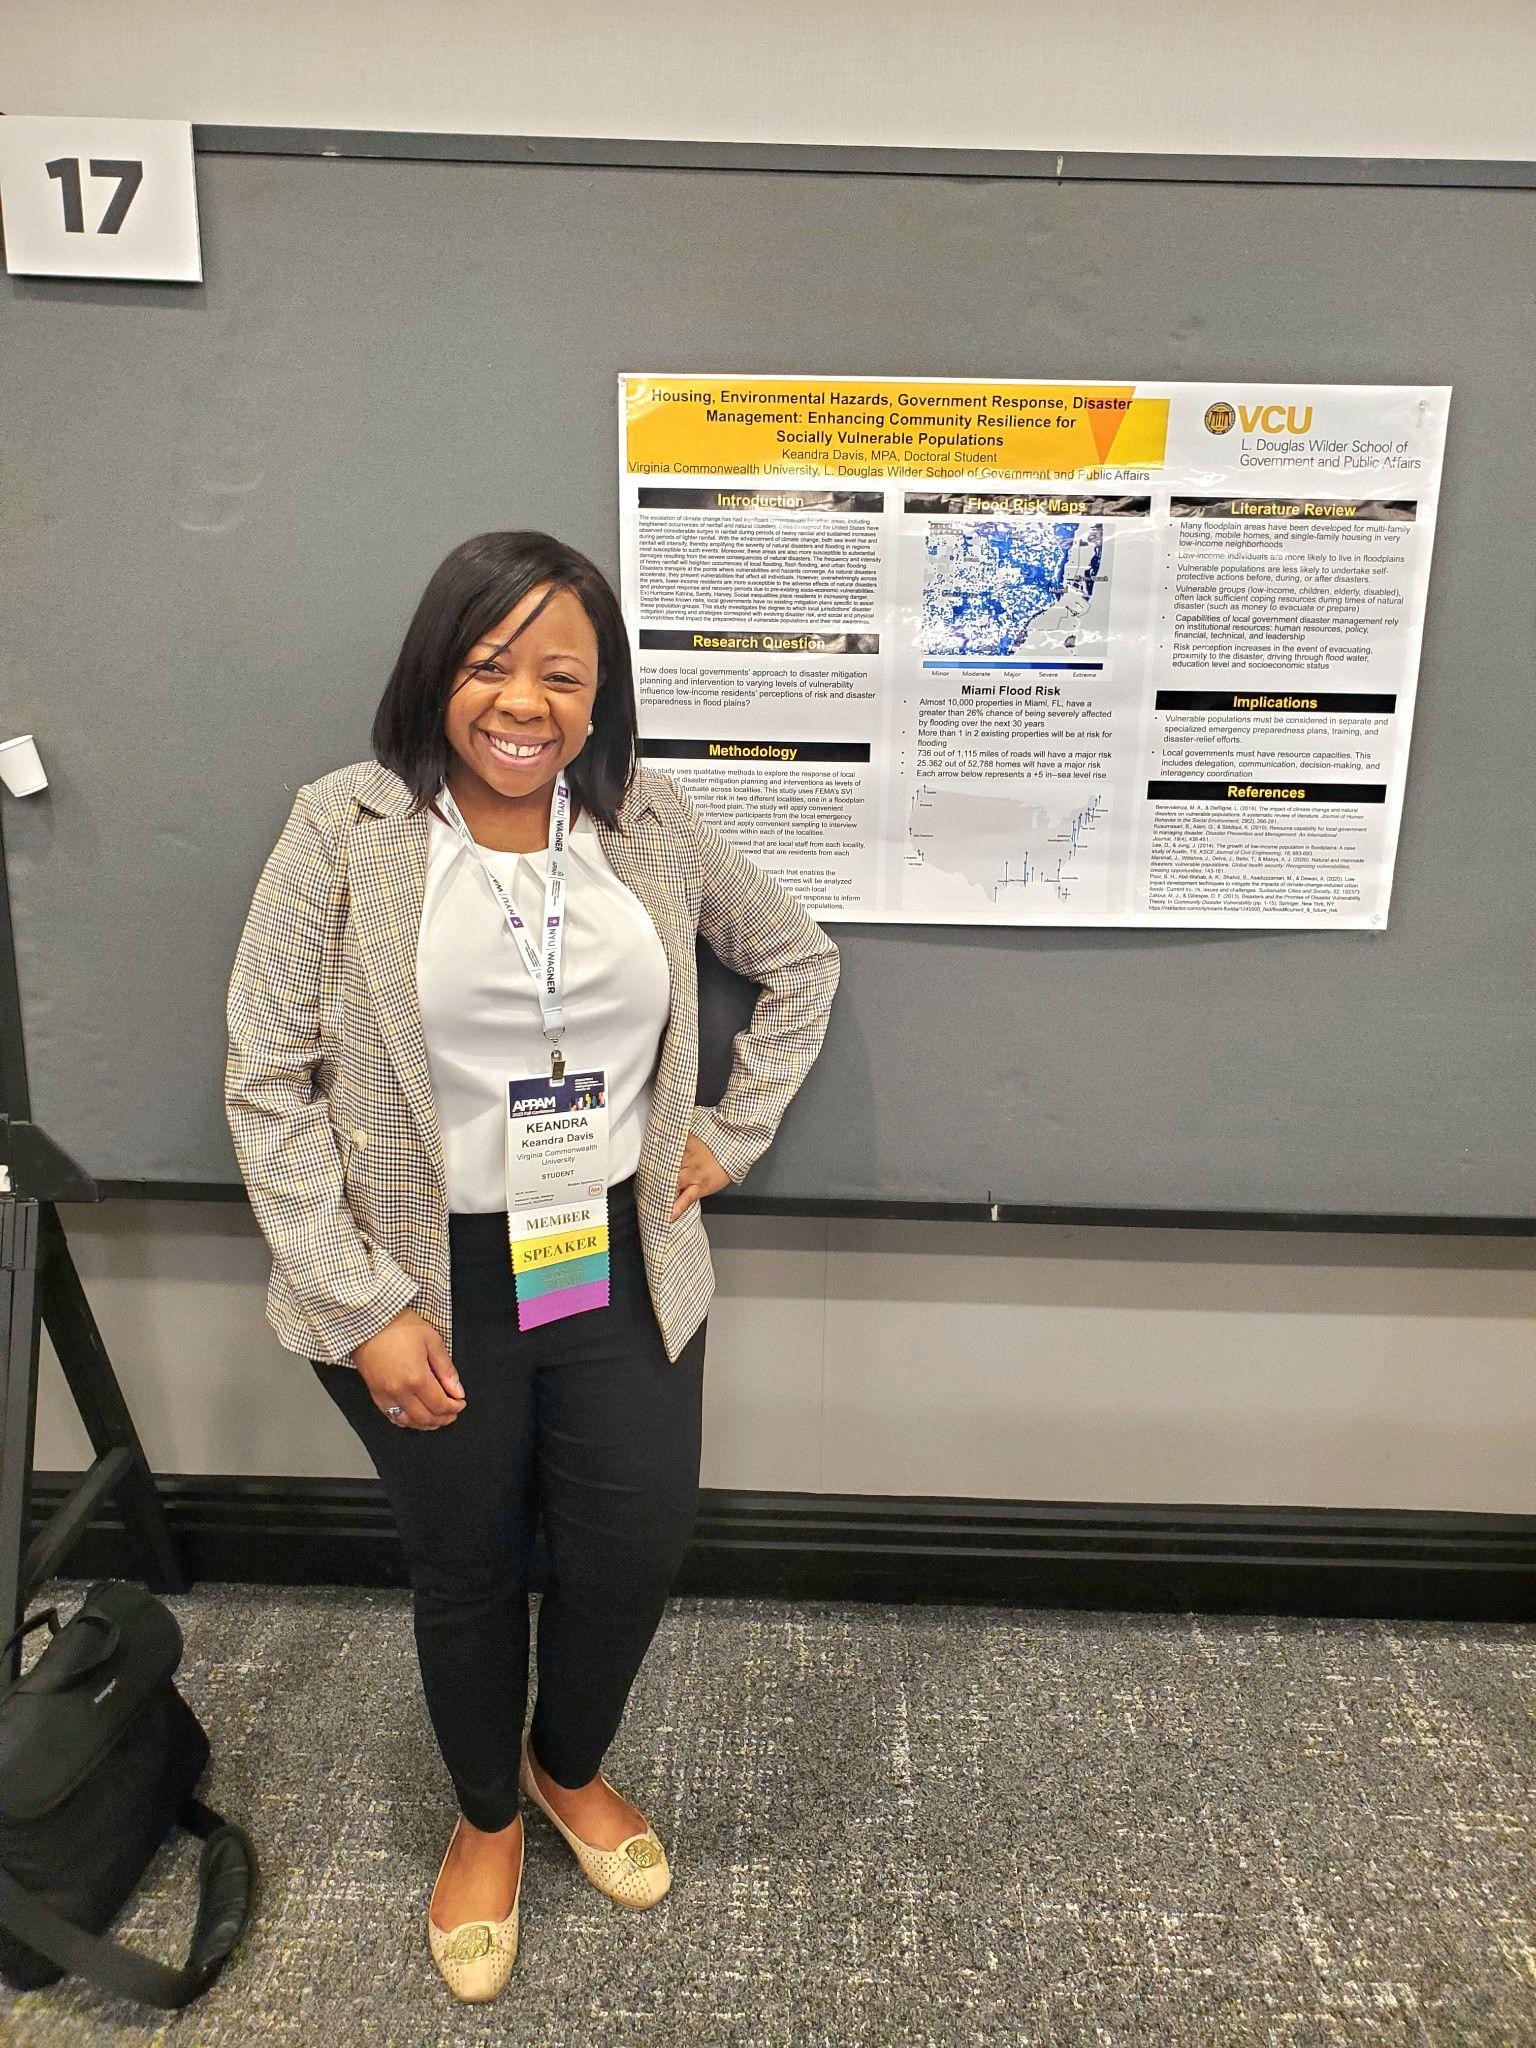 A woman presenting a research poster at a conference